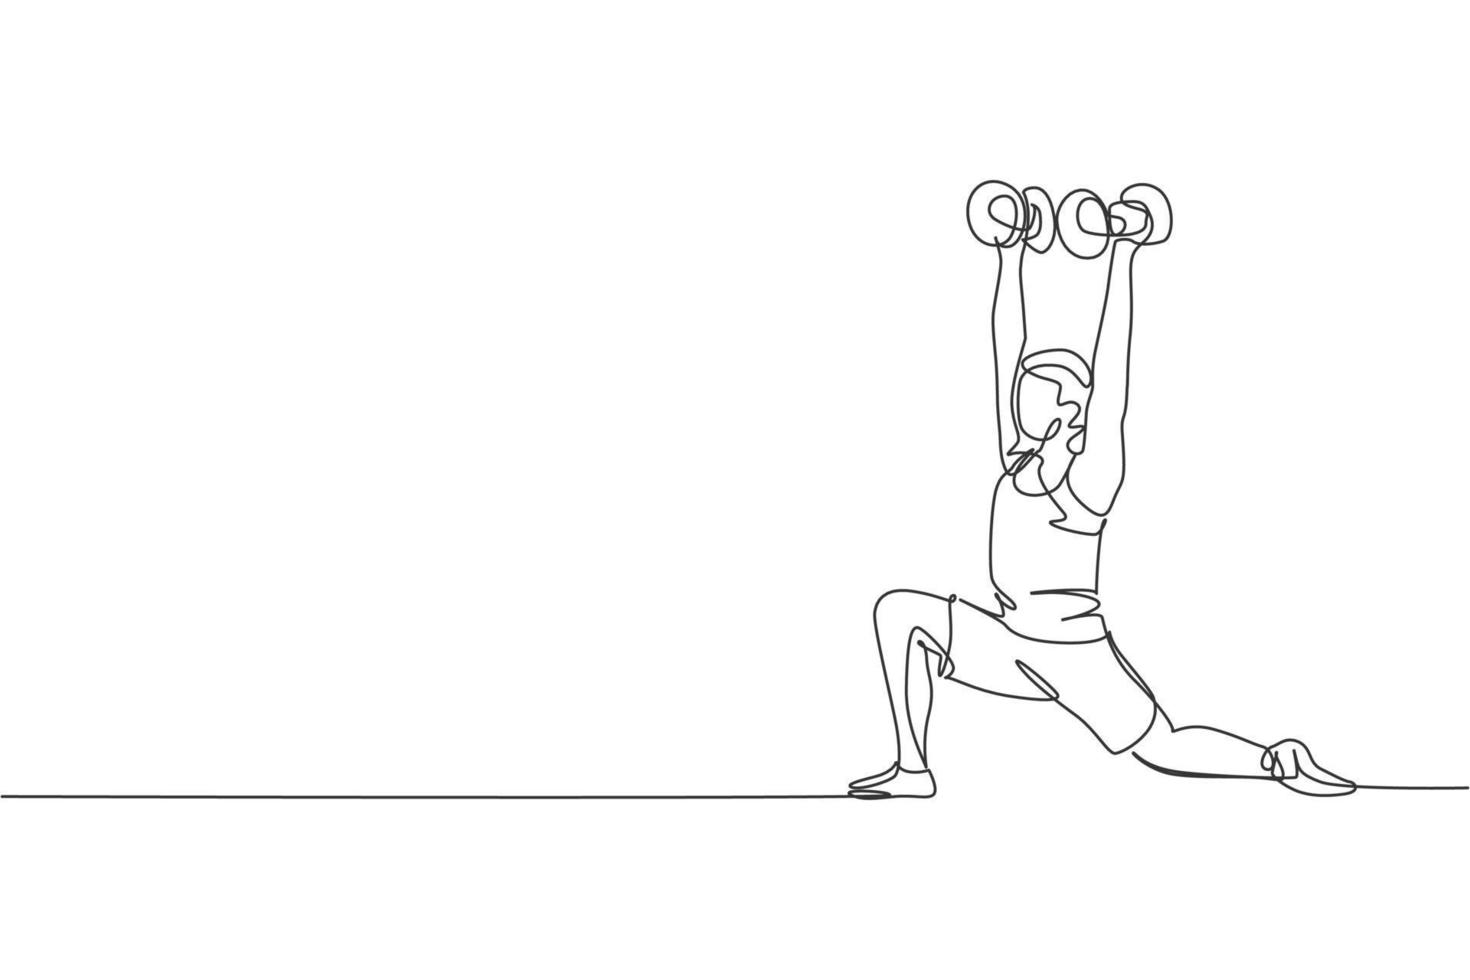 One single line drawing young energetic man working out doing low lunge with dumbbell in gym vector illustration. Fitness sport bodybuilding and healthy lifestyle concept. Modern continuous line draw